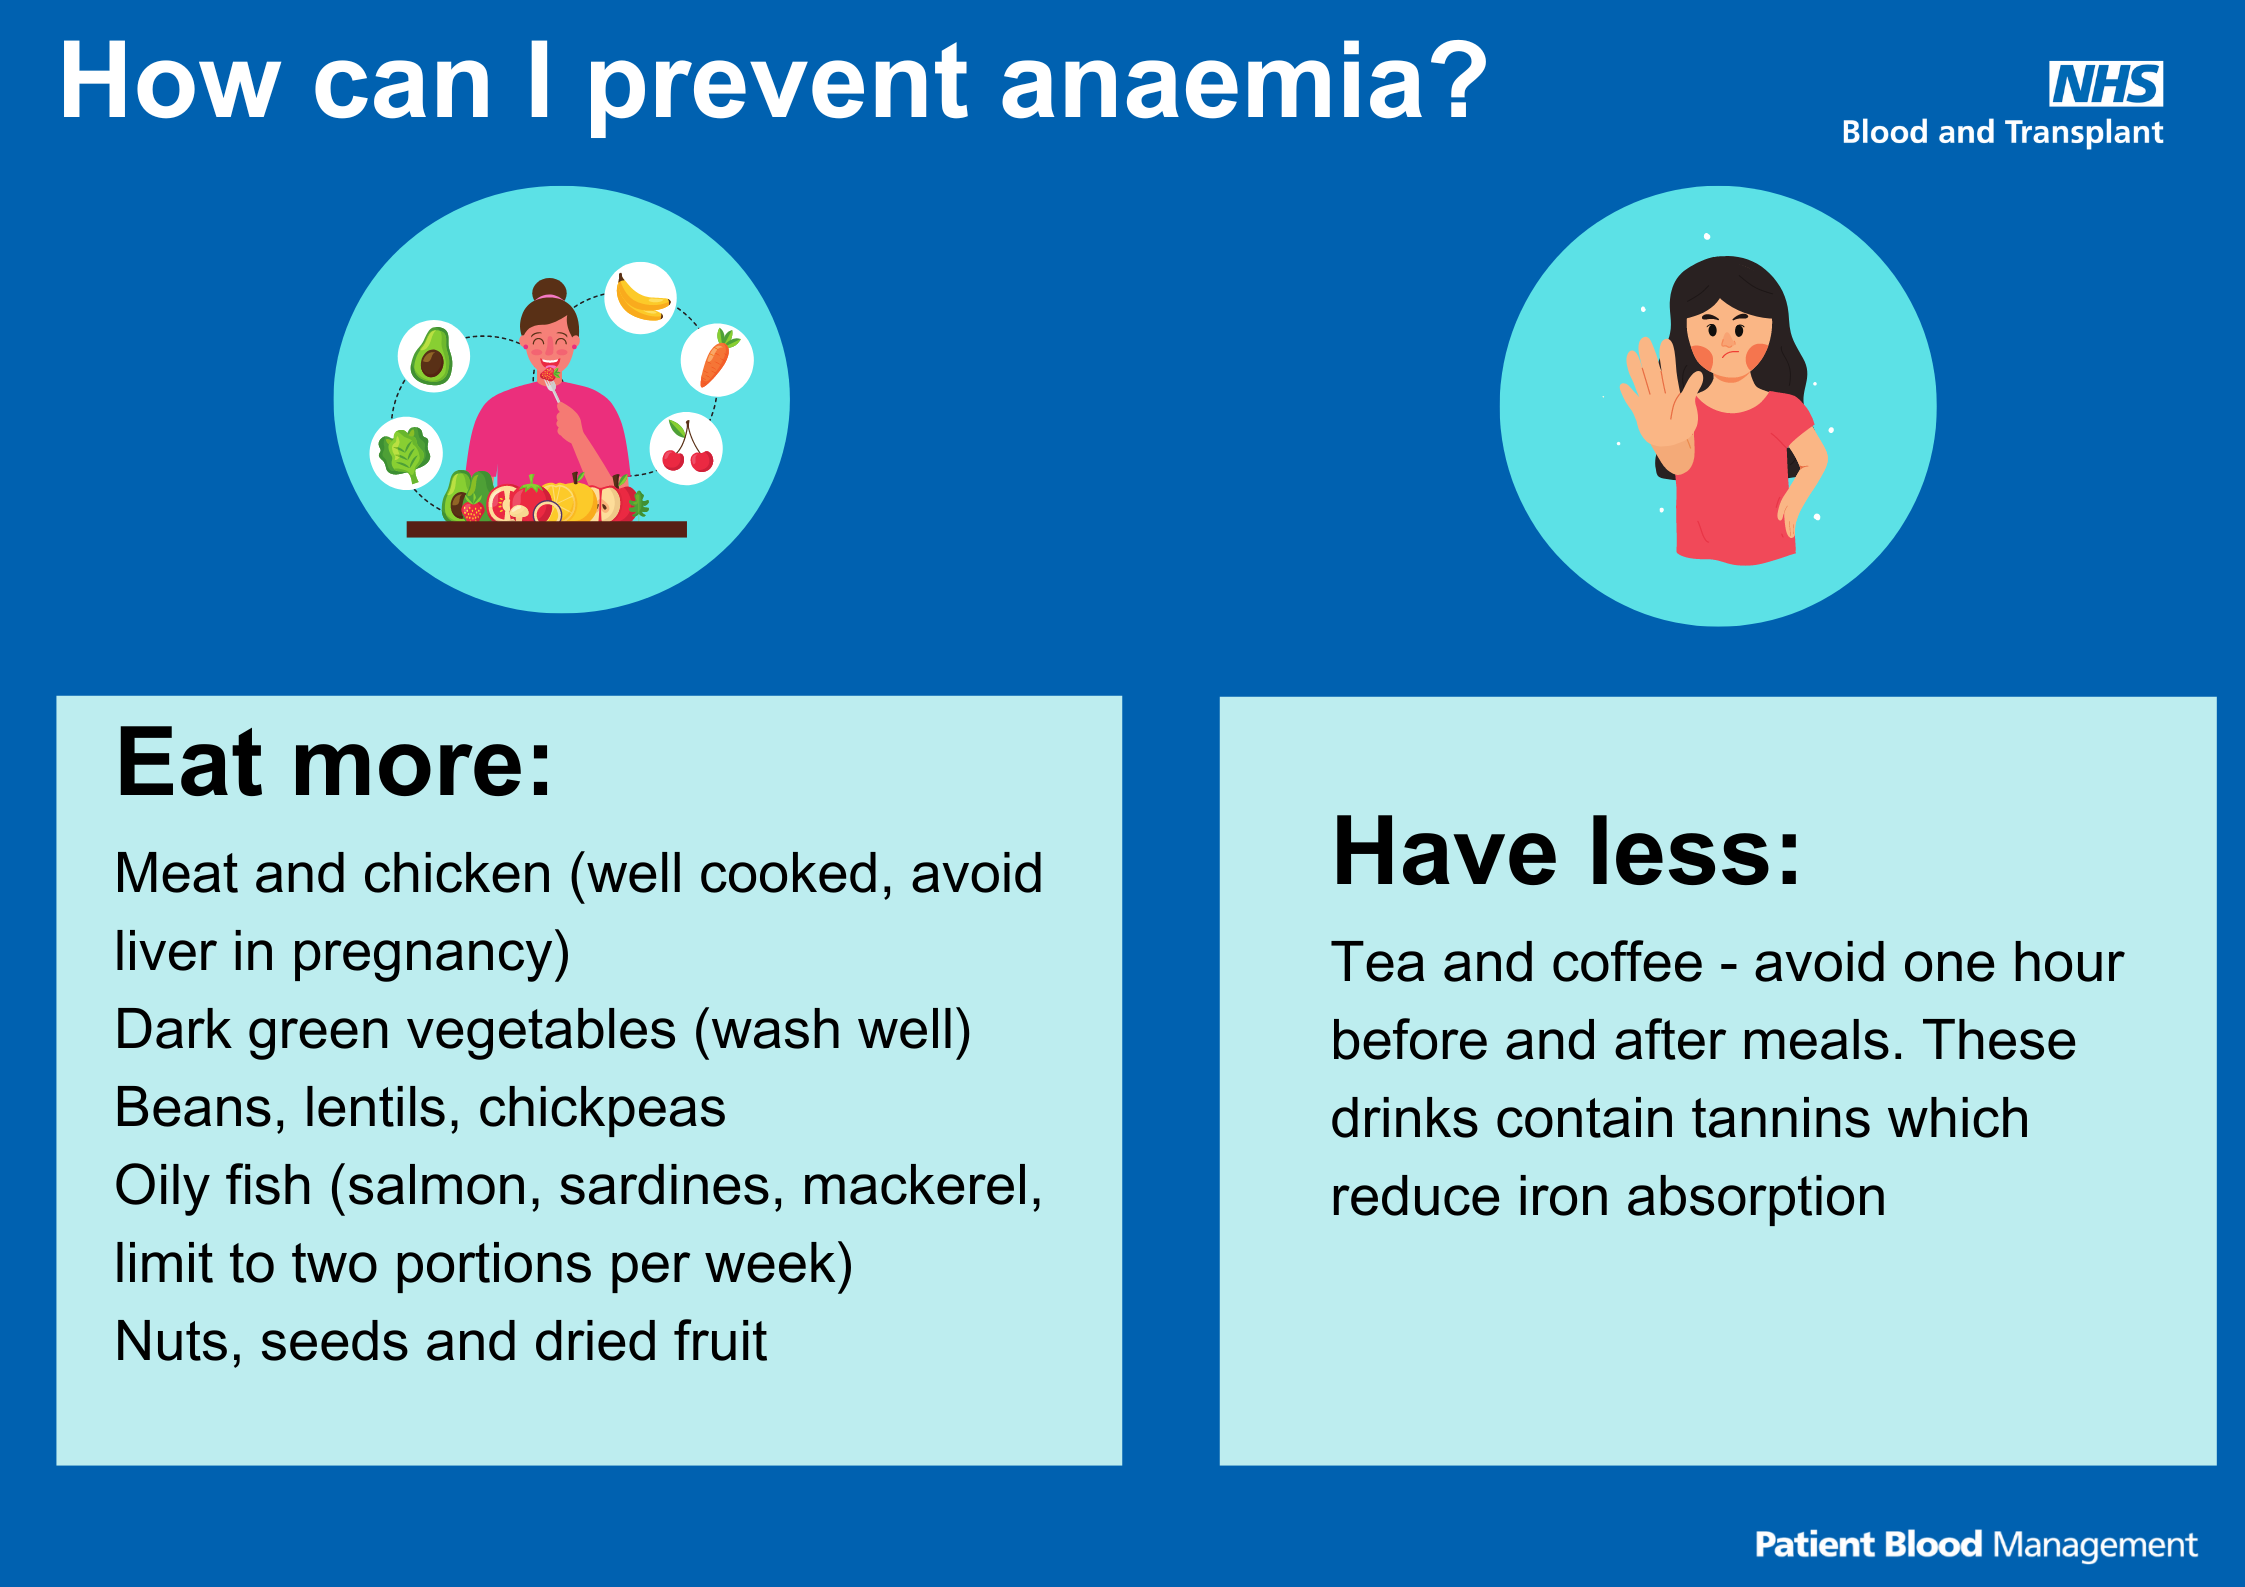 How can I prevent anaemia infographic - scroll down for text version